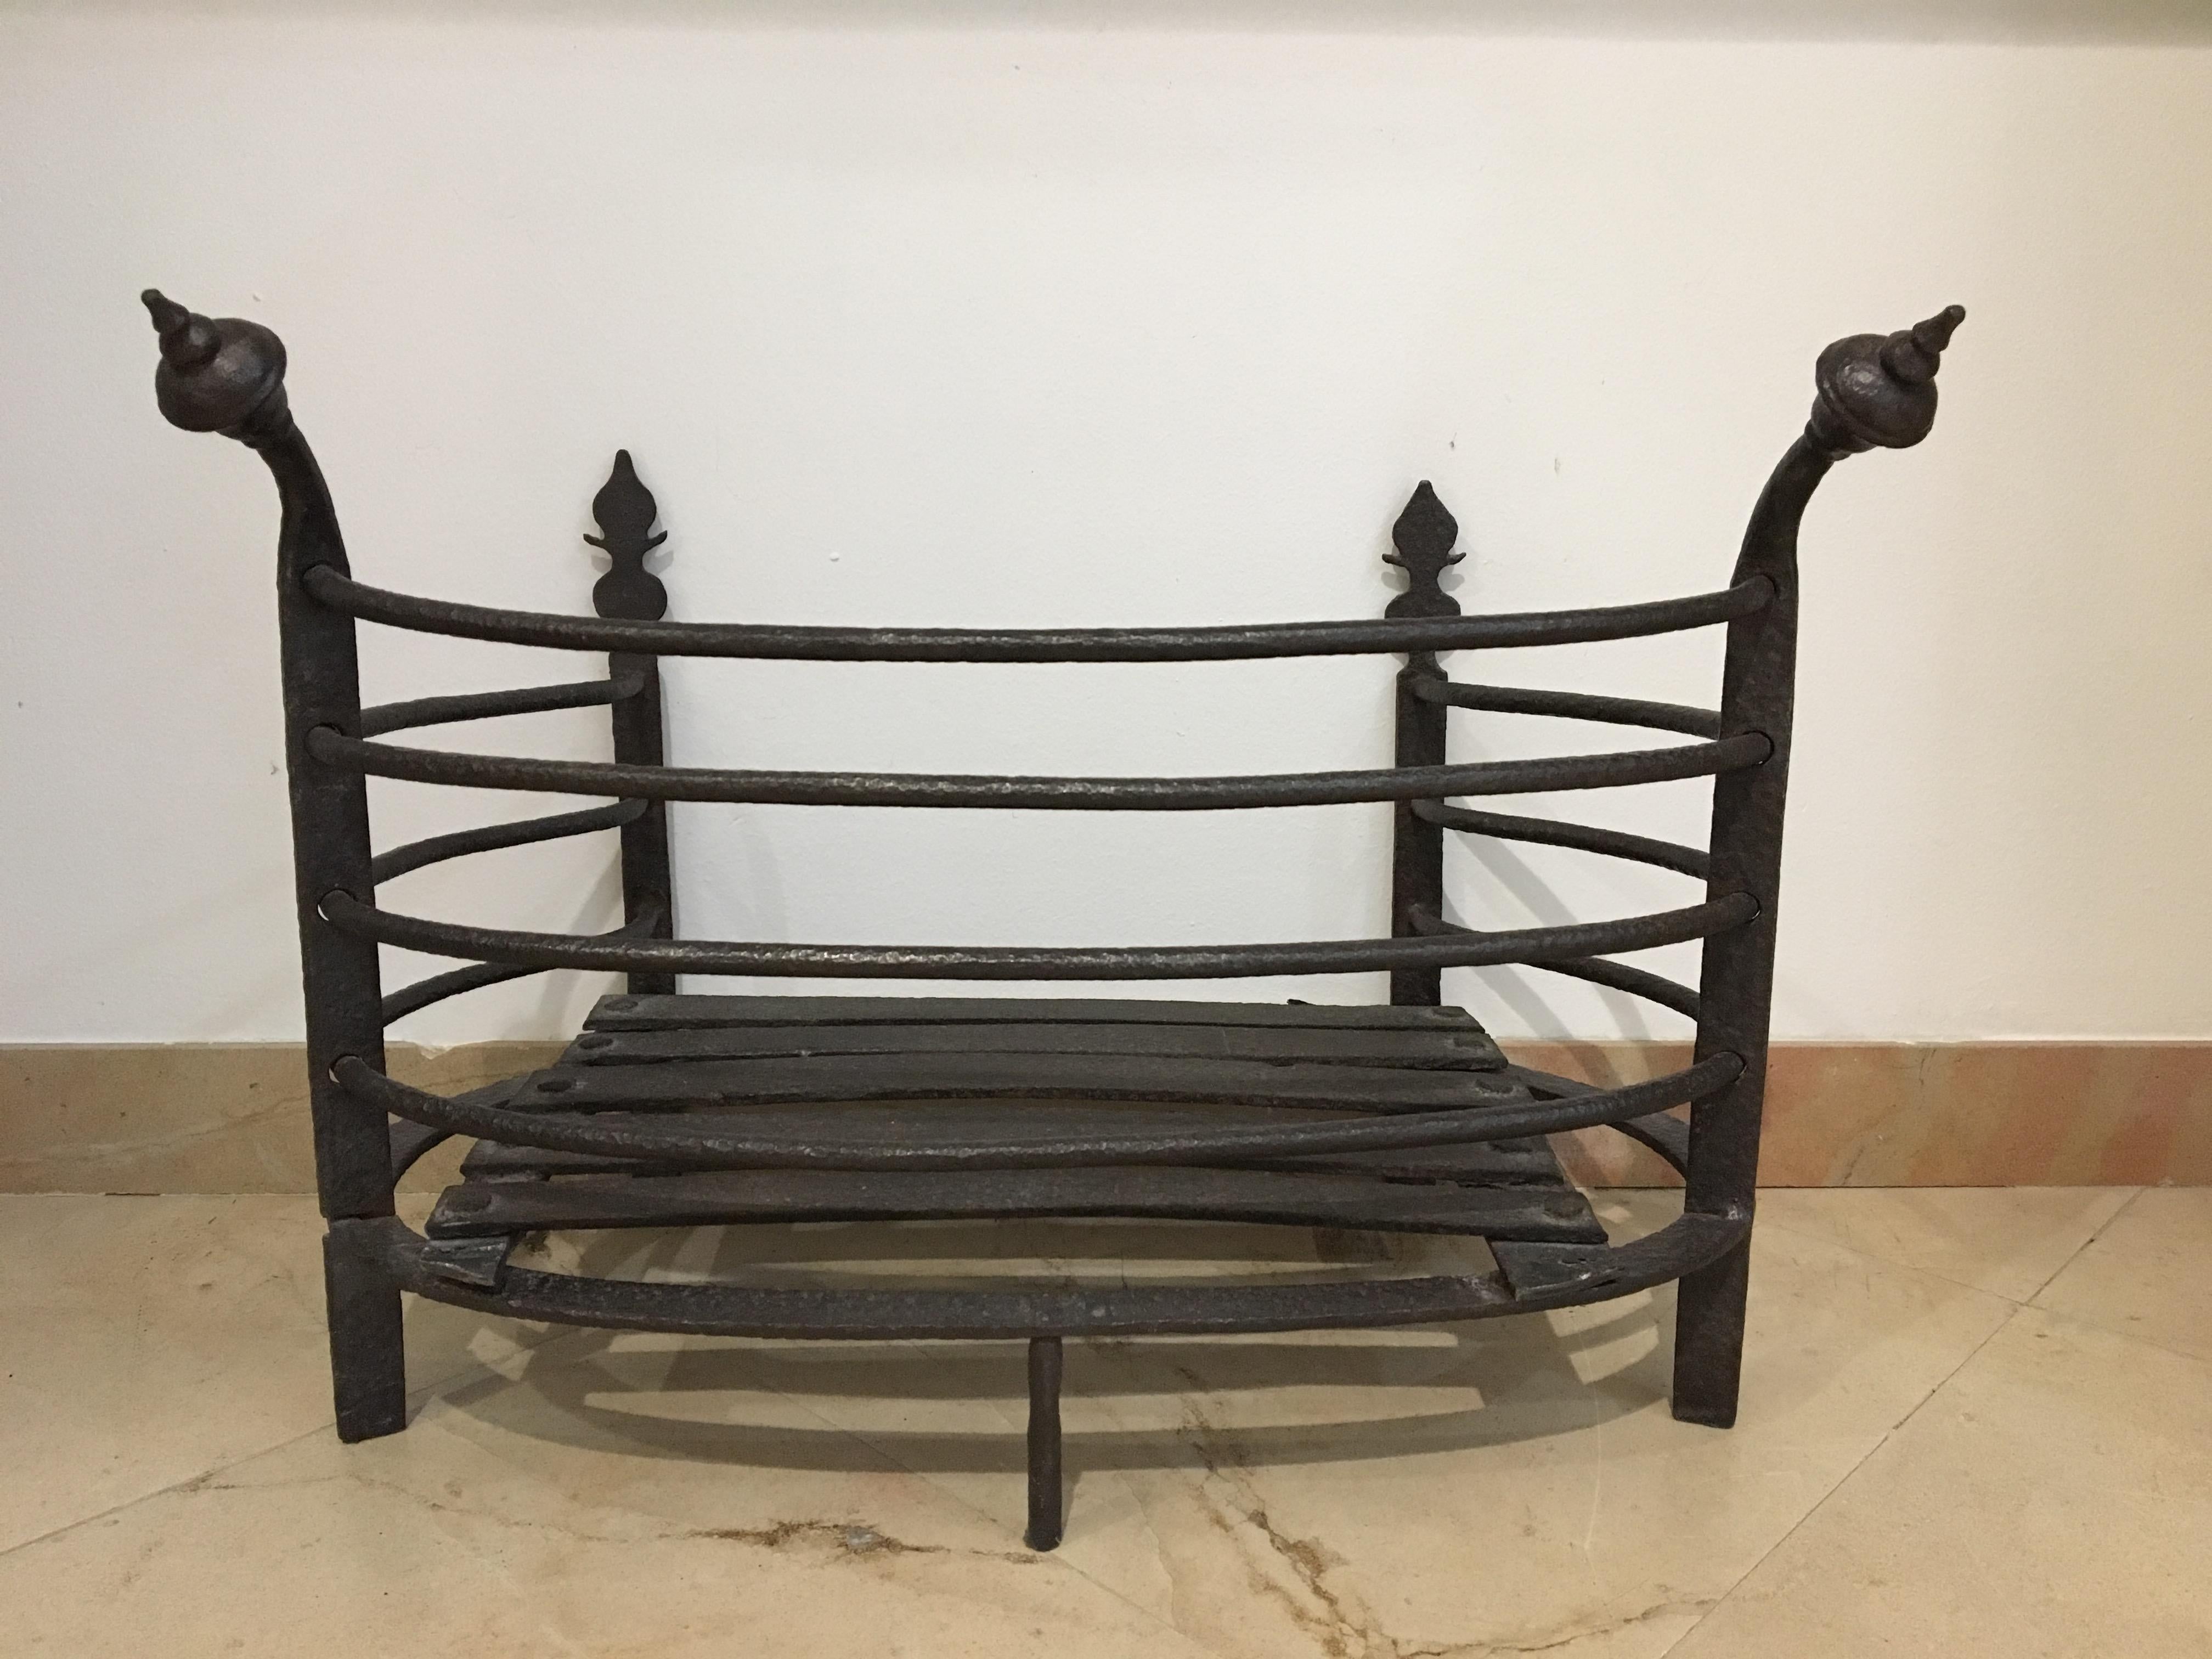 Antique fire grate, fireplace basket

Great curved wrought iron antique firebacket or fire grate.
Perfect size, beautiful condition and great shape.




               